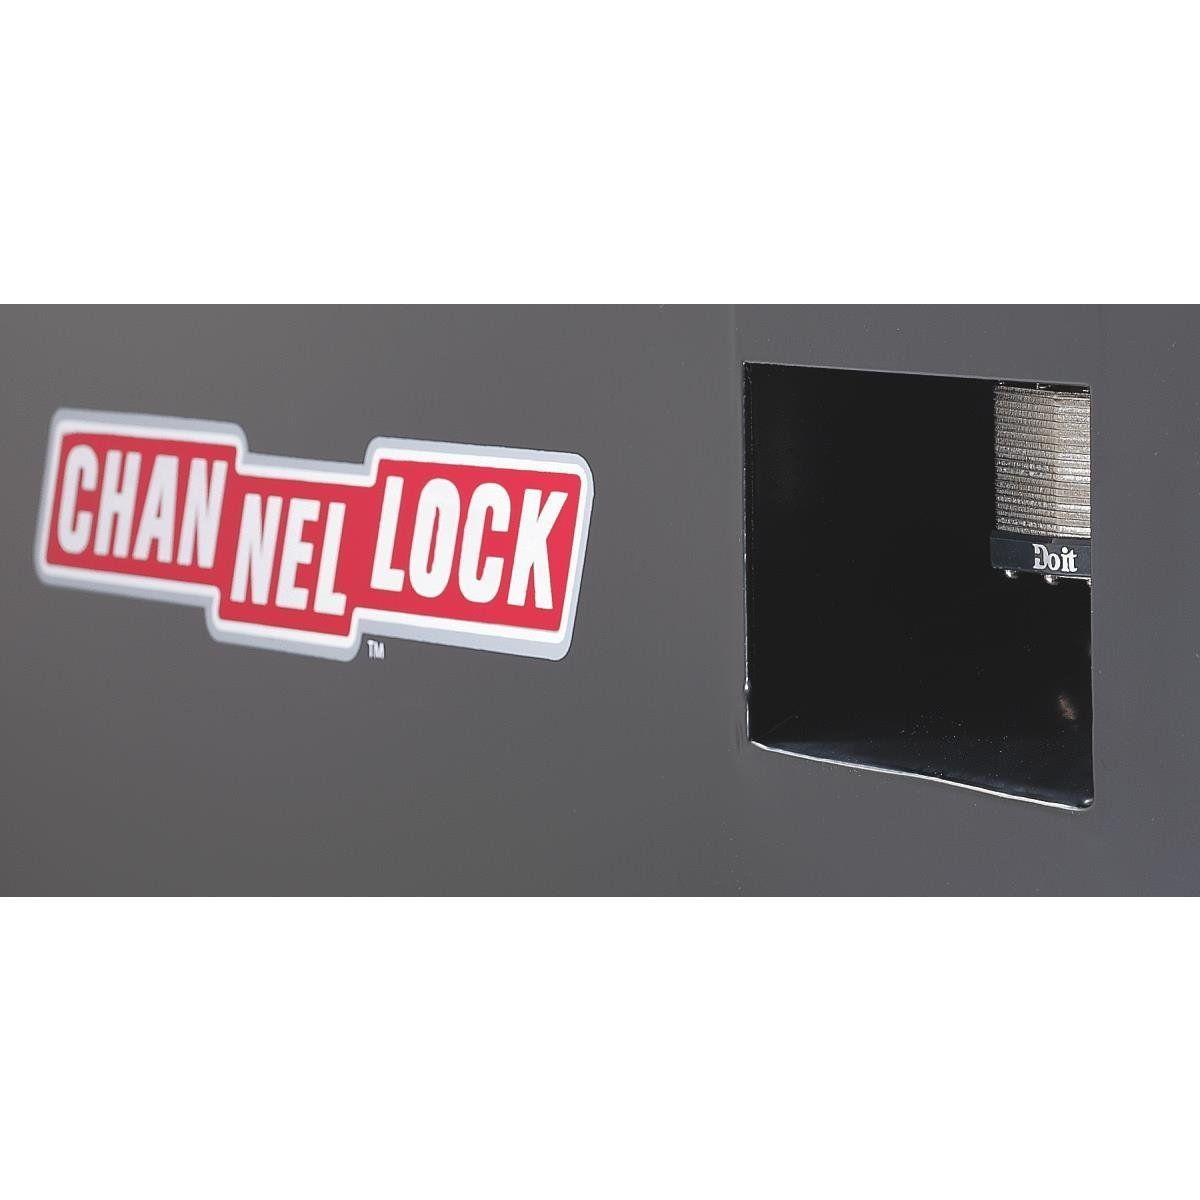 Channellock Logo - Job Site Toolbox - SP19103 - CHANNELLOCK ®